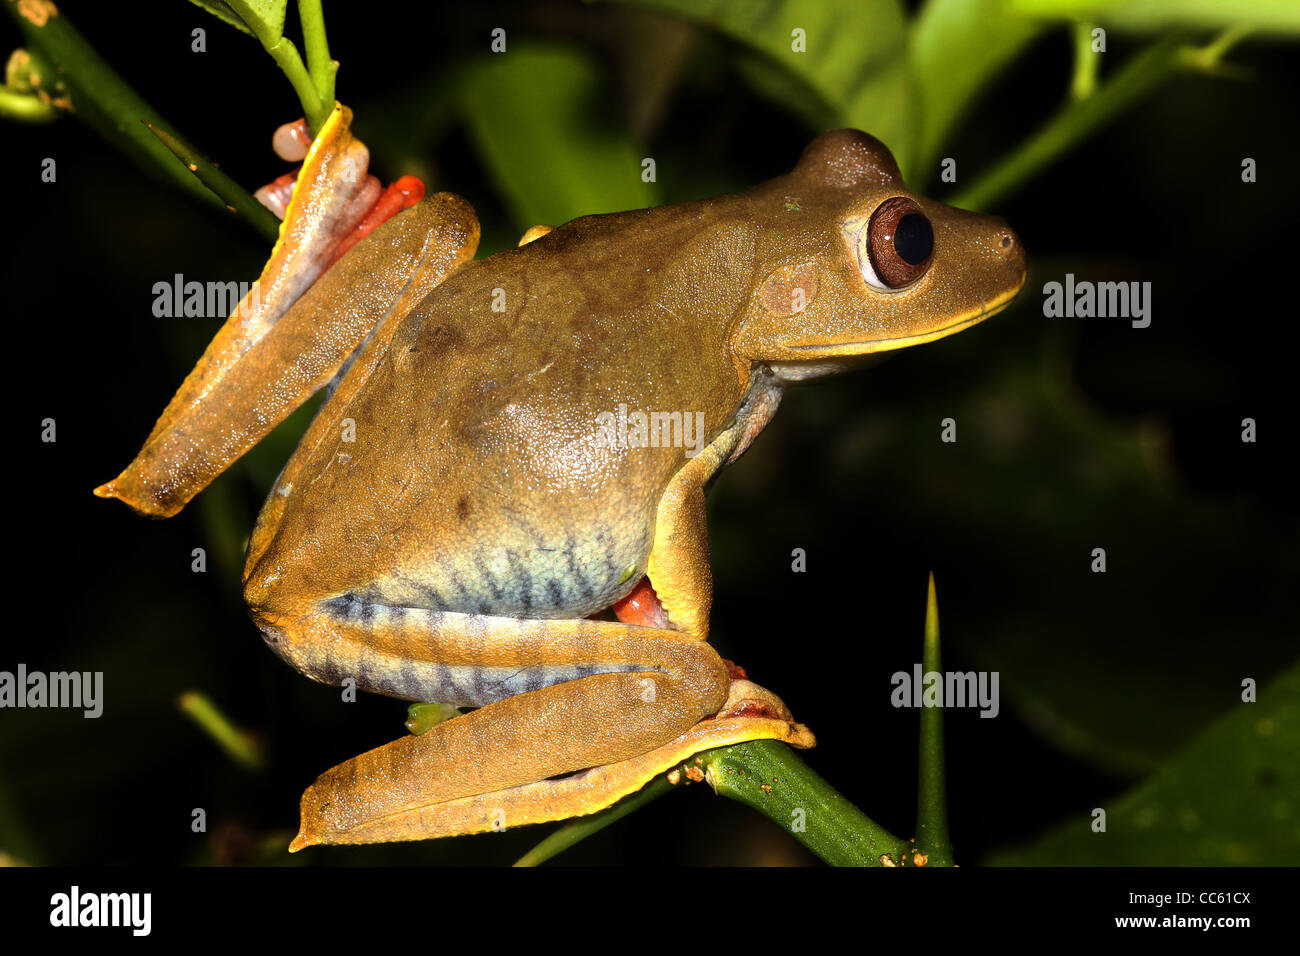 The Map Treefrog (Hypsiboas geographicus) in the Peruvian Amazon Isolated with space for text Stock Photo